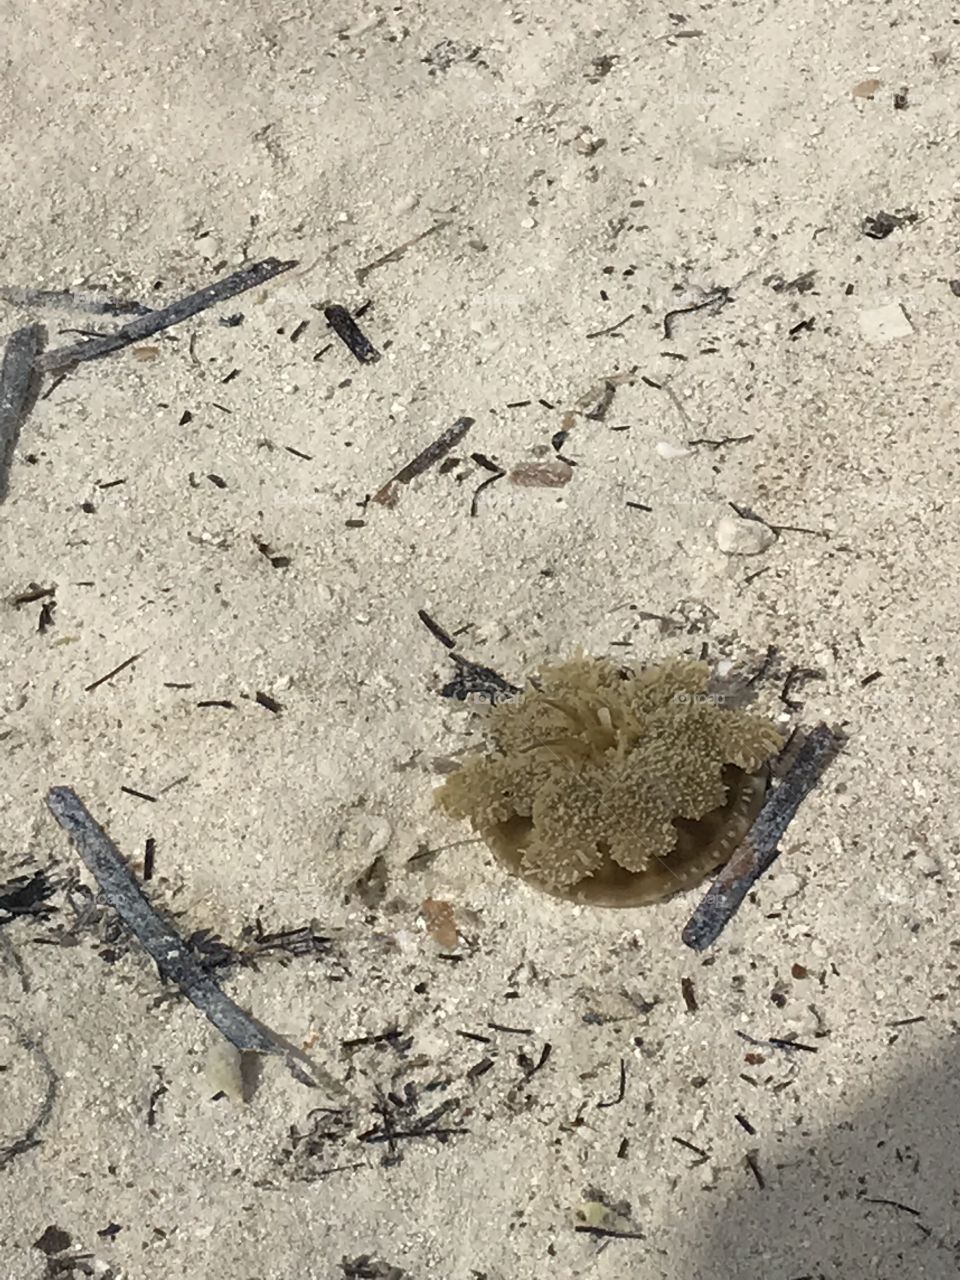 Found on the beach in the Bahamas. He was just chilling in the little pool of water.